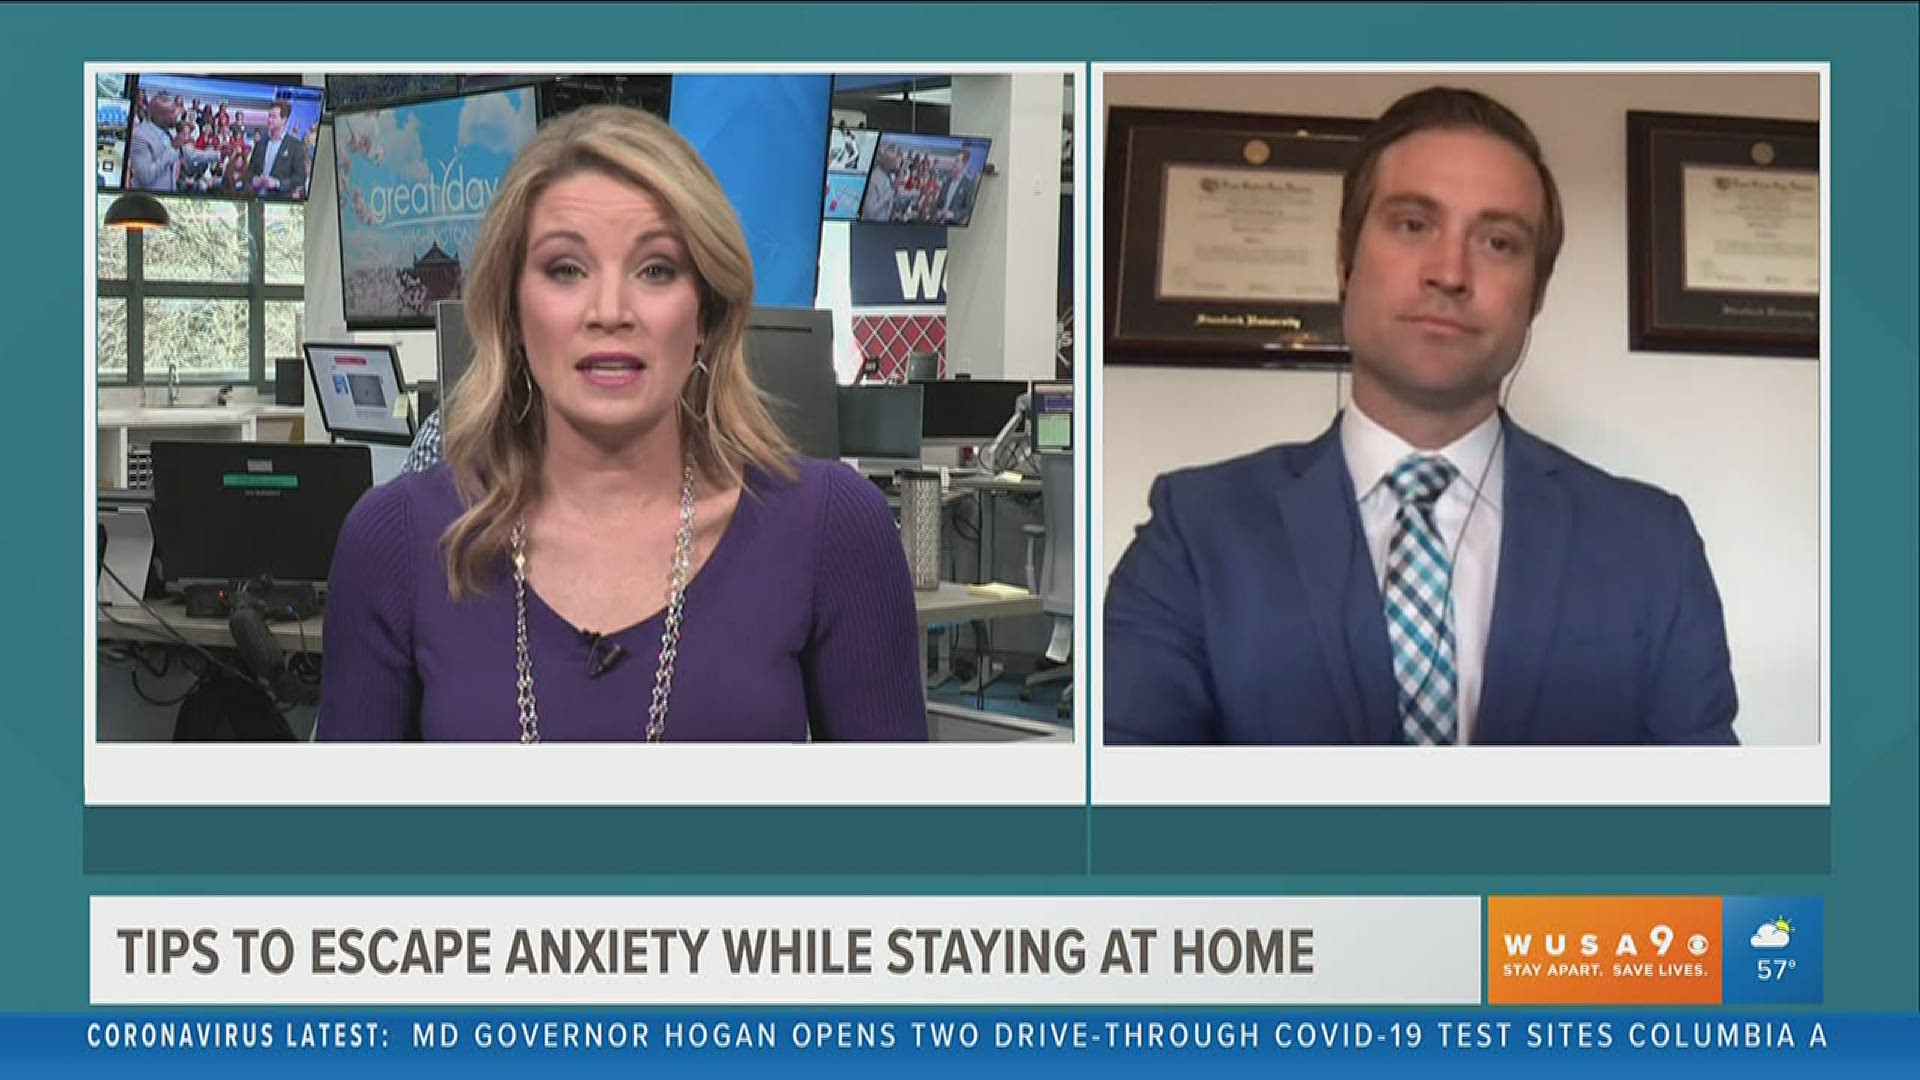 Does staying at home drive you nuts? While it's the best way to slow the pandemic, lack of social interaction can lead to anxiety. Dr. Don Vaughn shares a few tips.